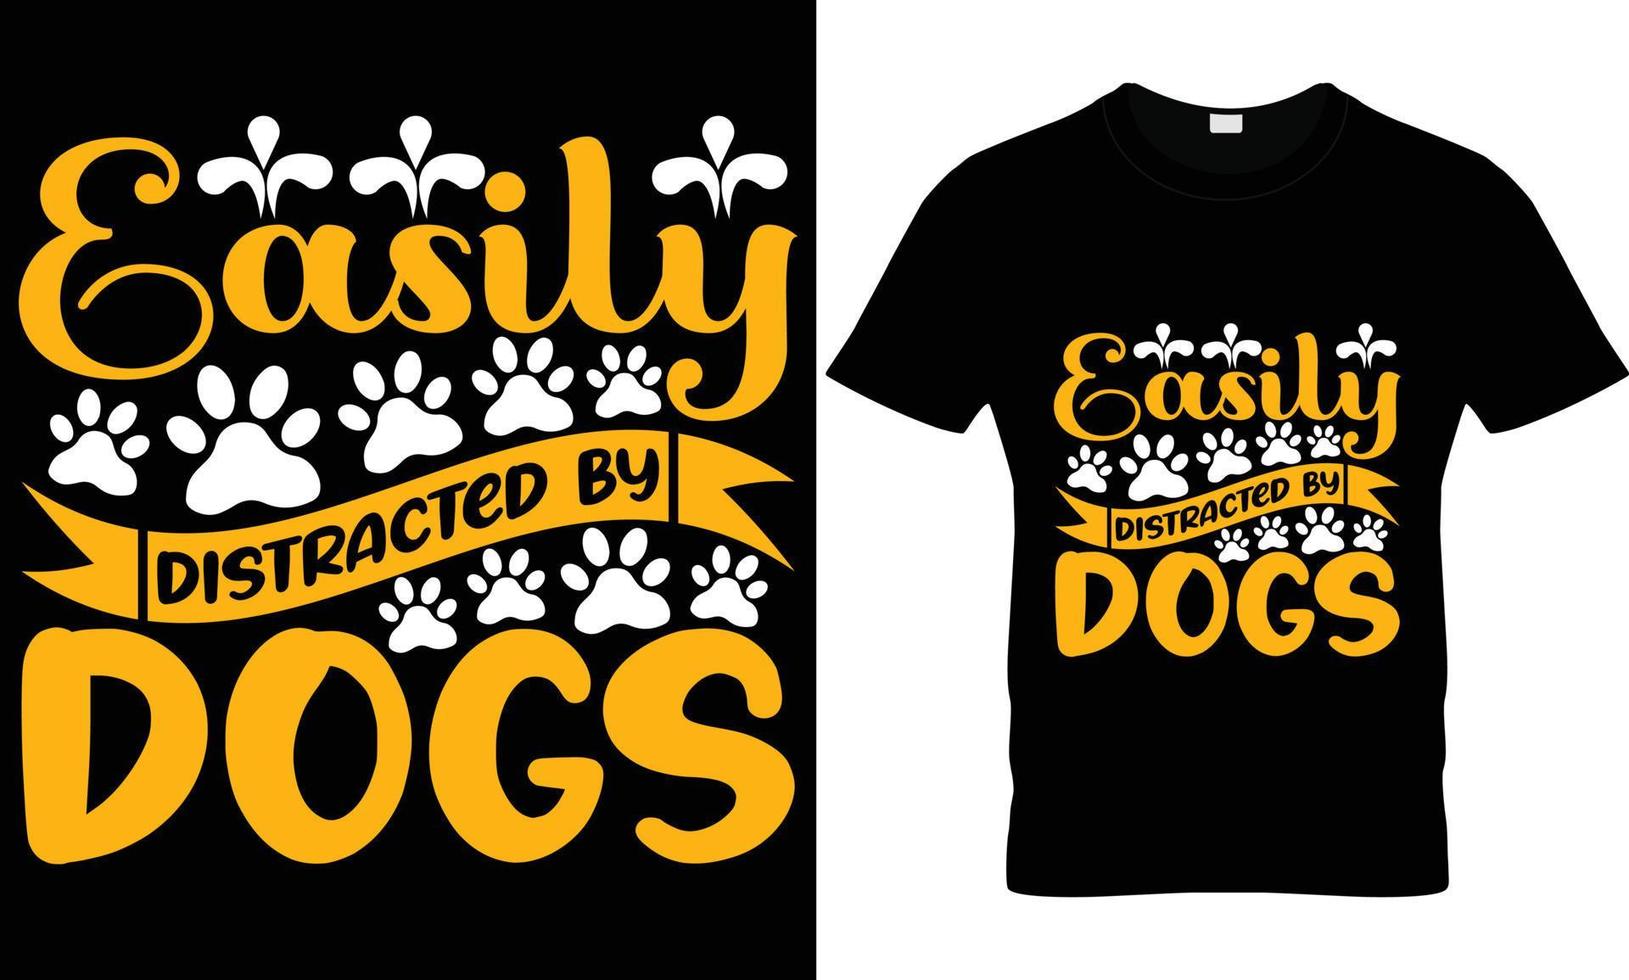 easily distracted by dogs t shirt design vector